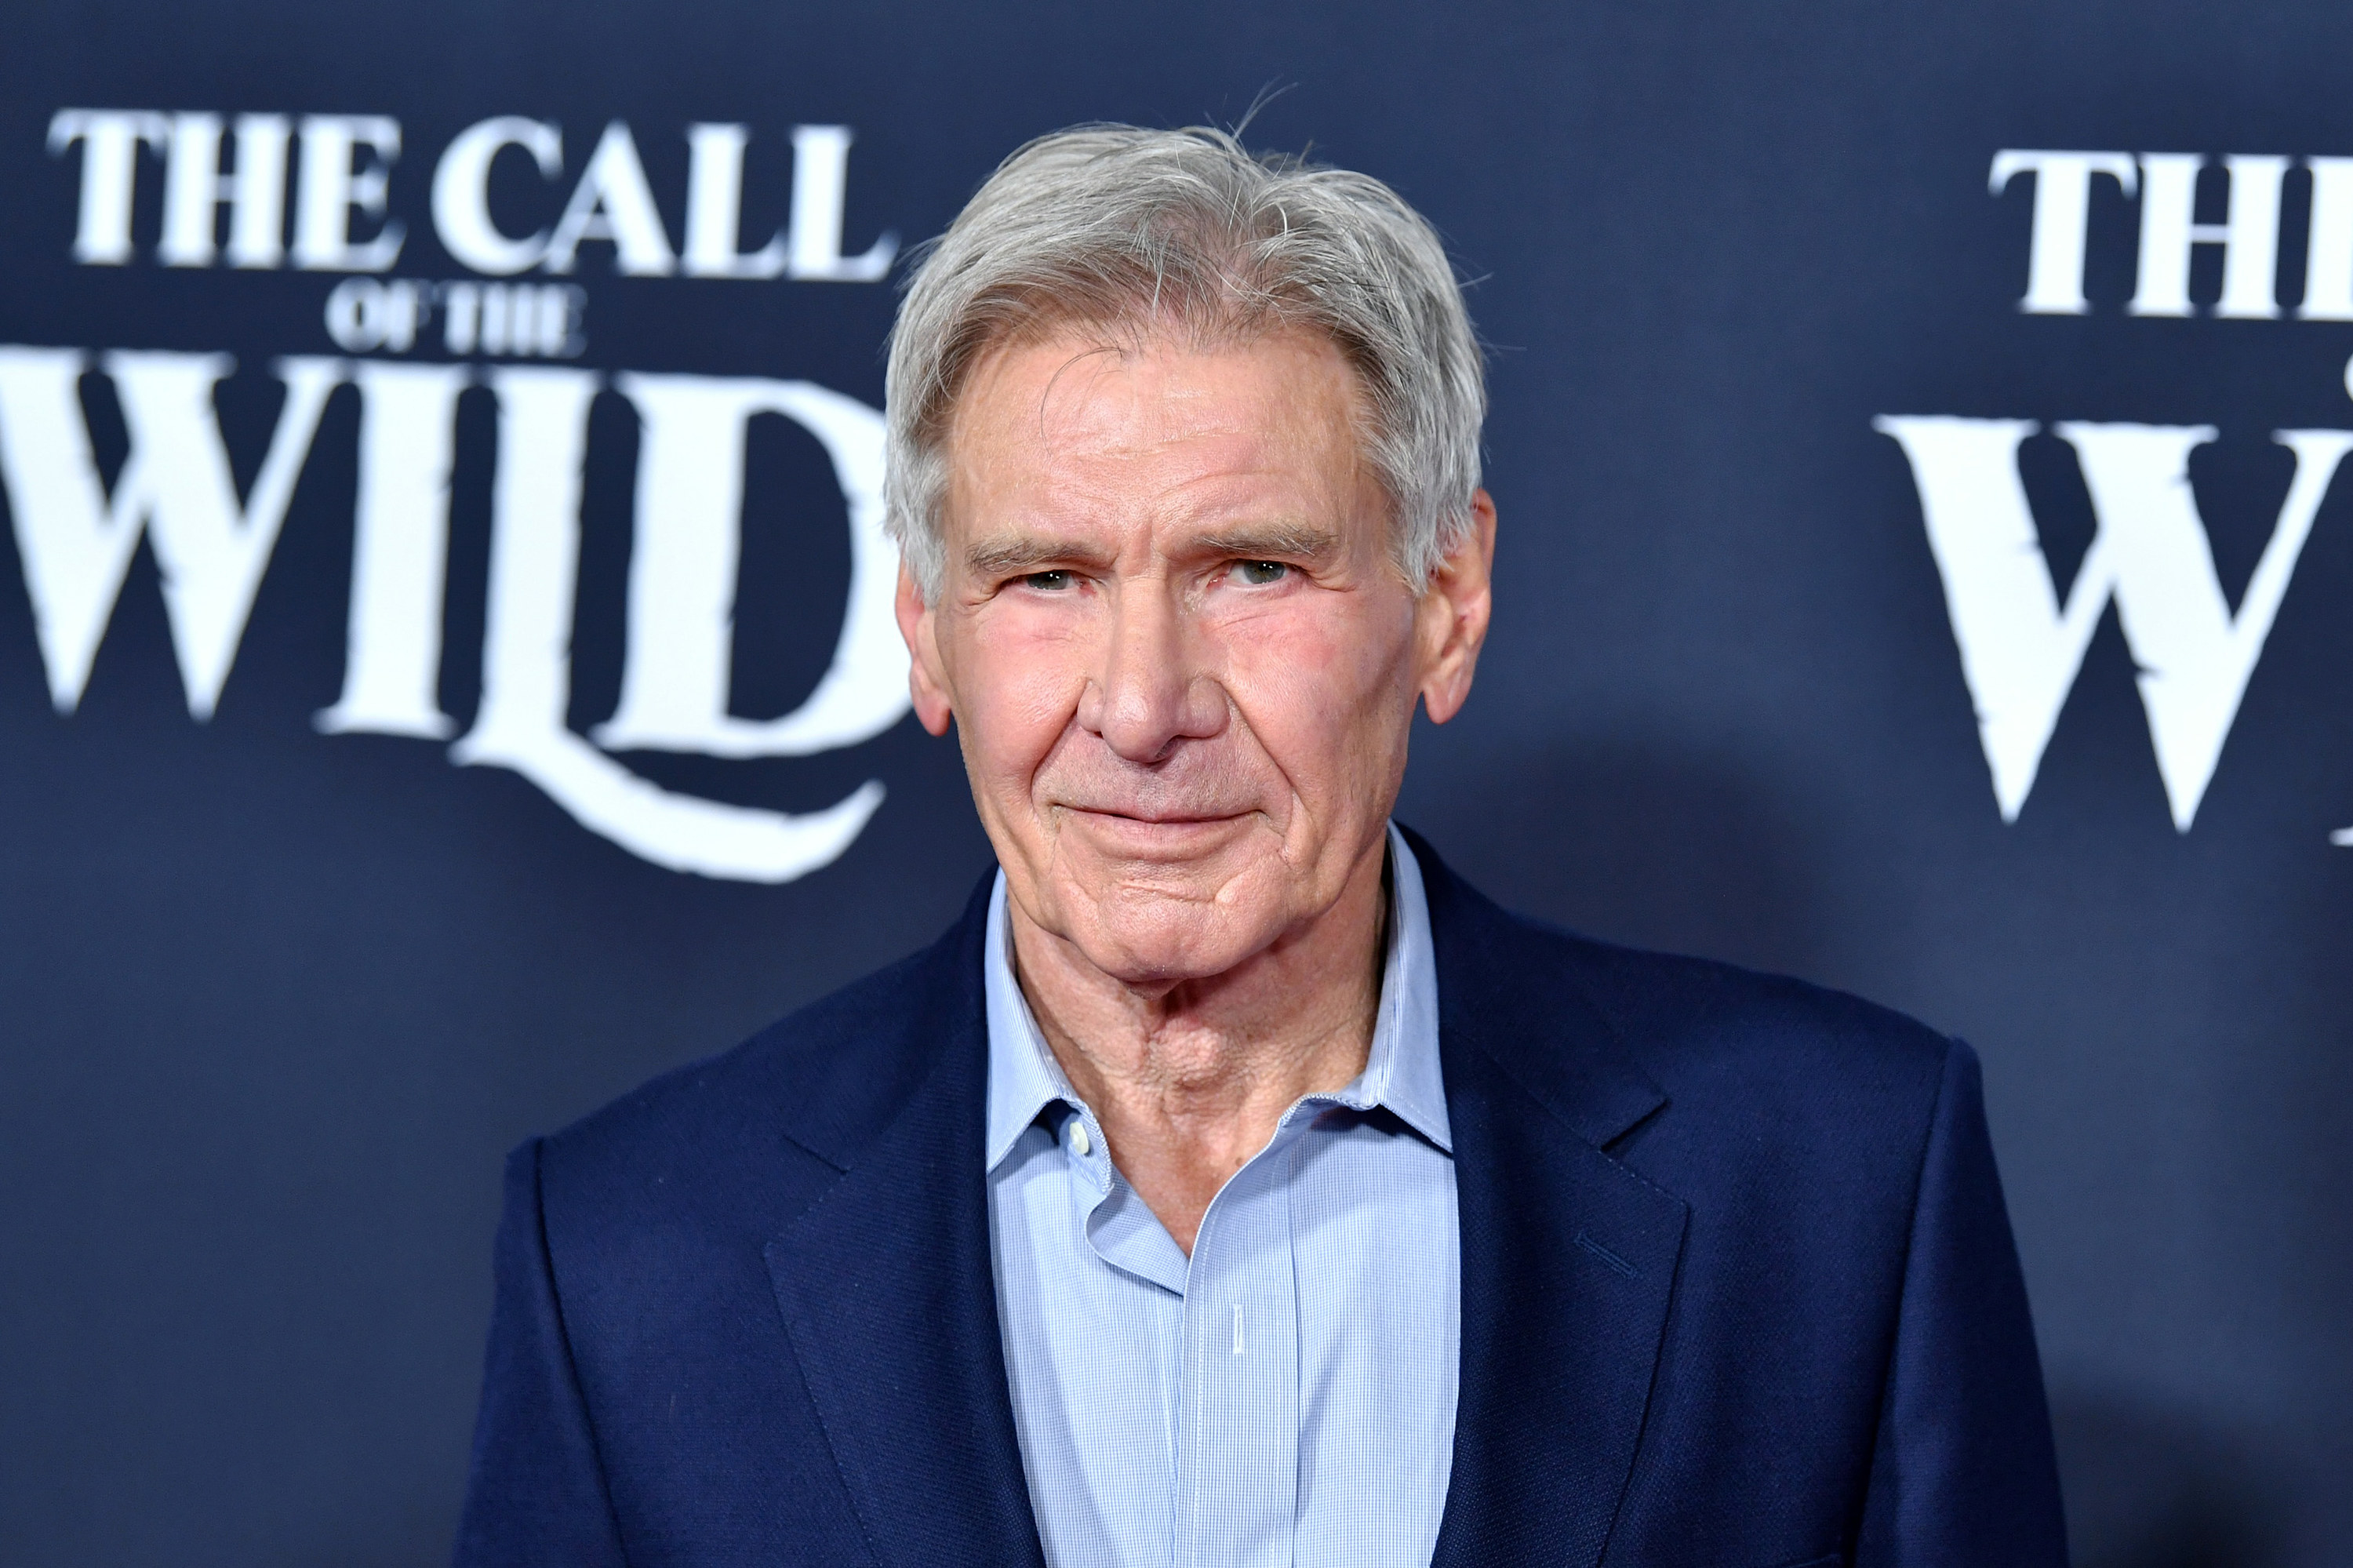 harrison ford at the call of the wild premiere